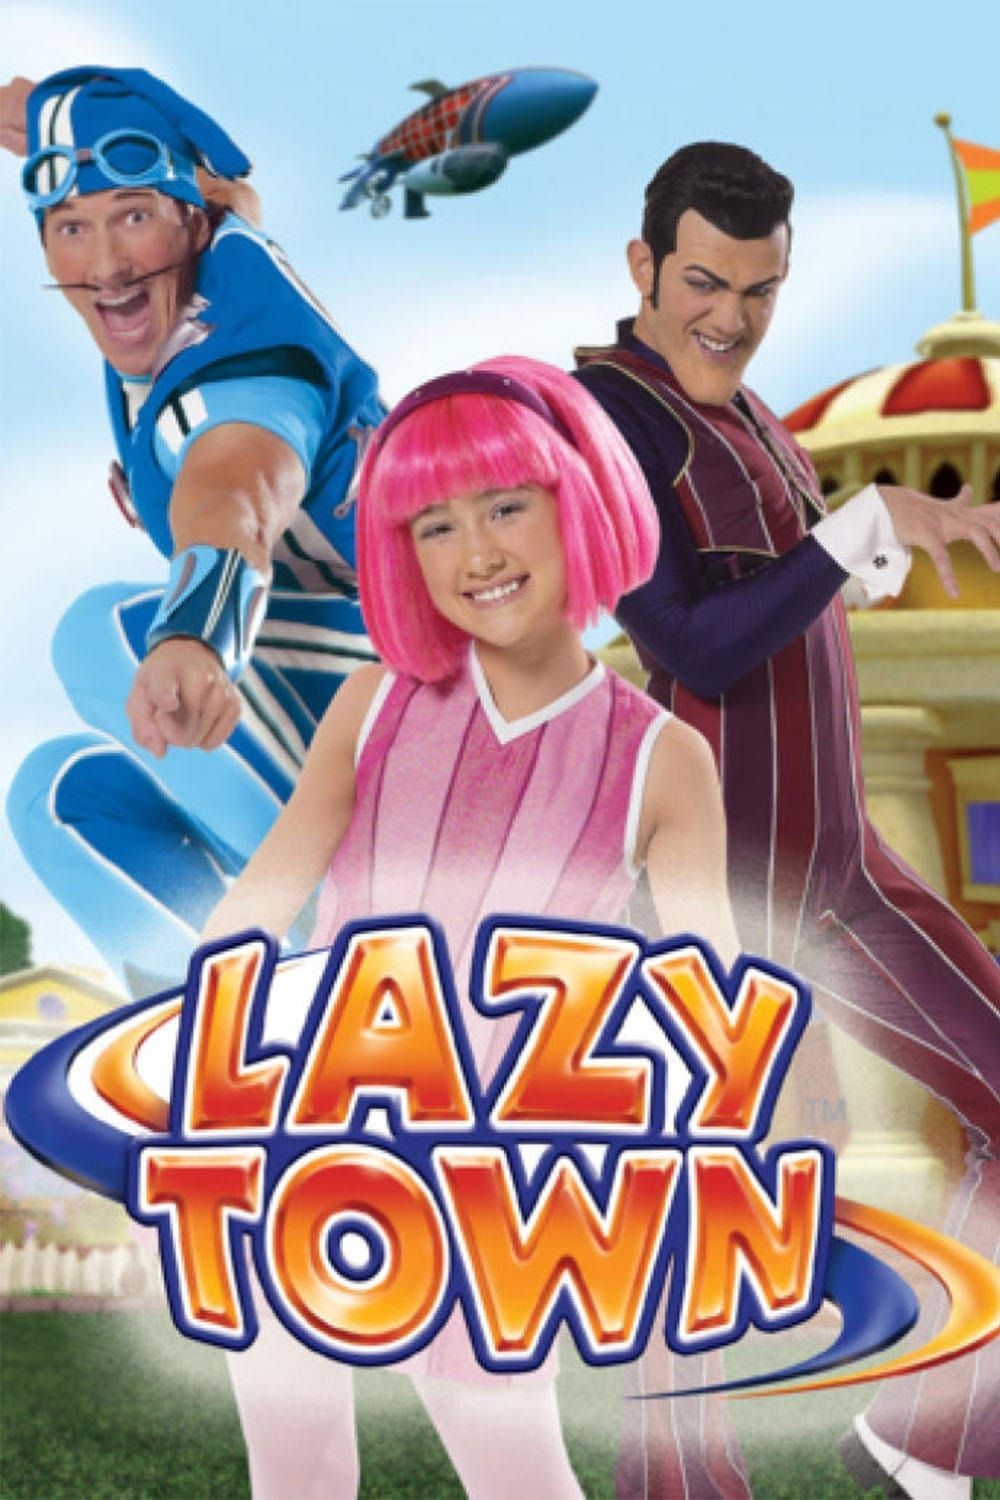 TV SHOWS BACK THEN, lazy town spartacus push ups